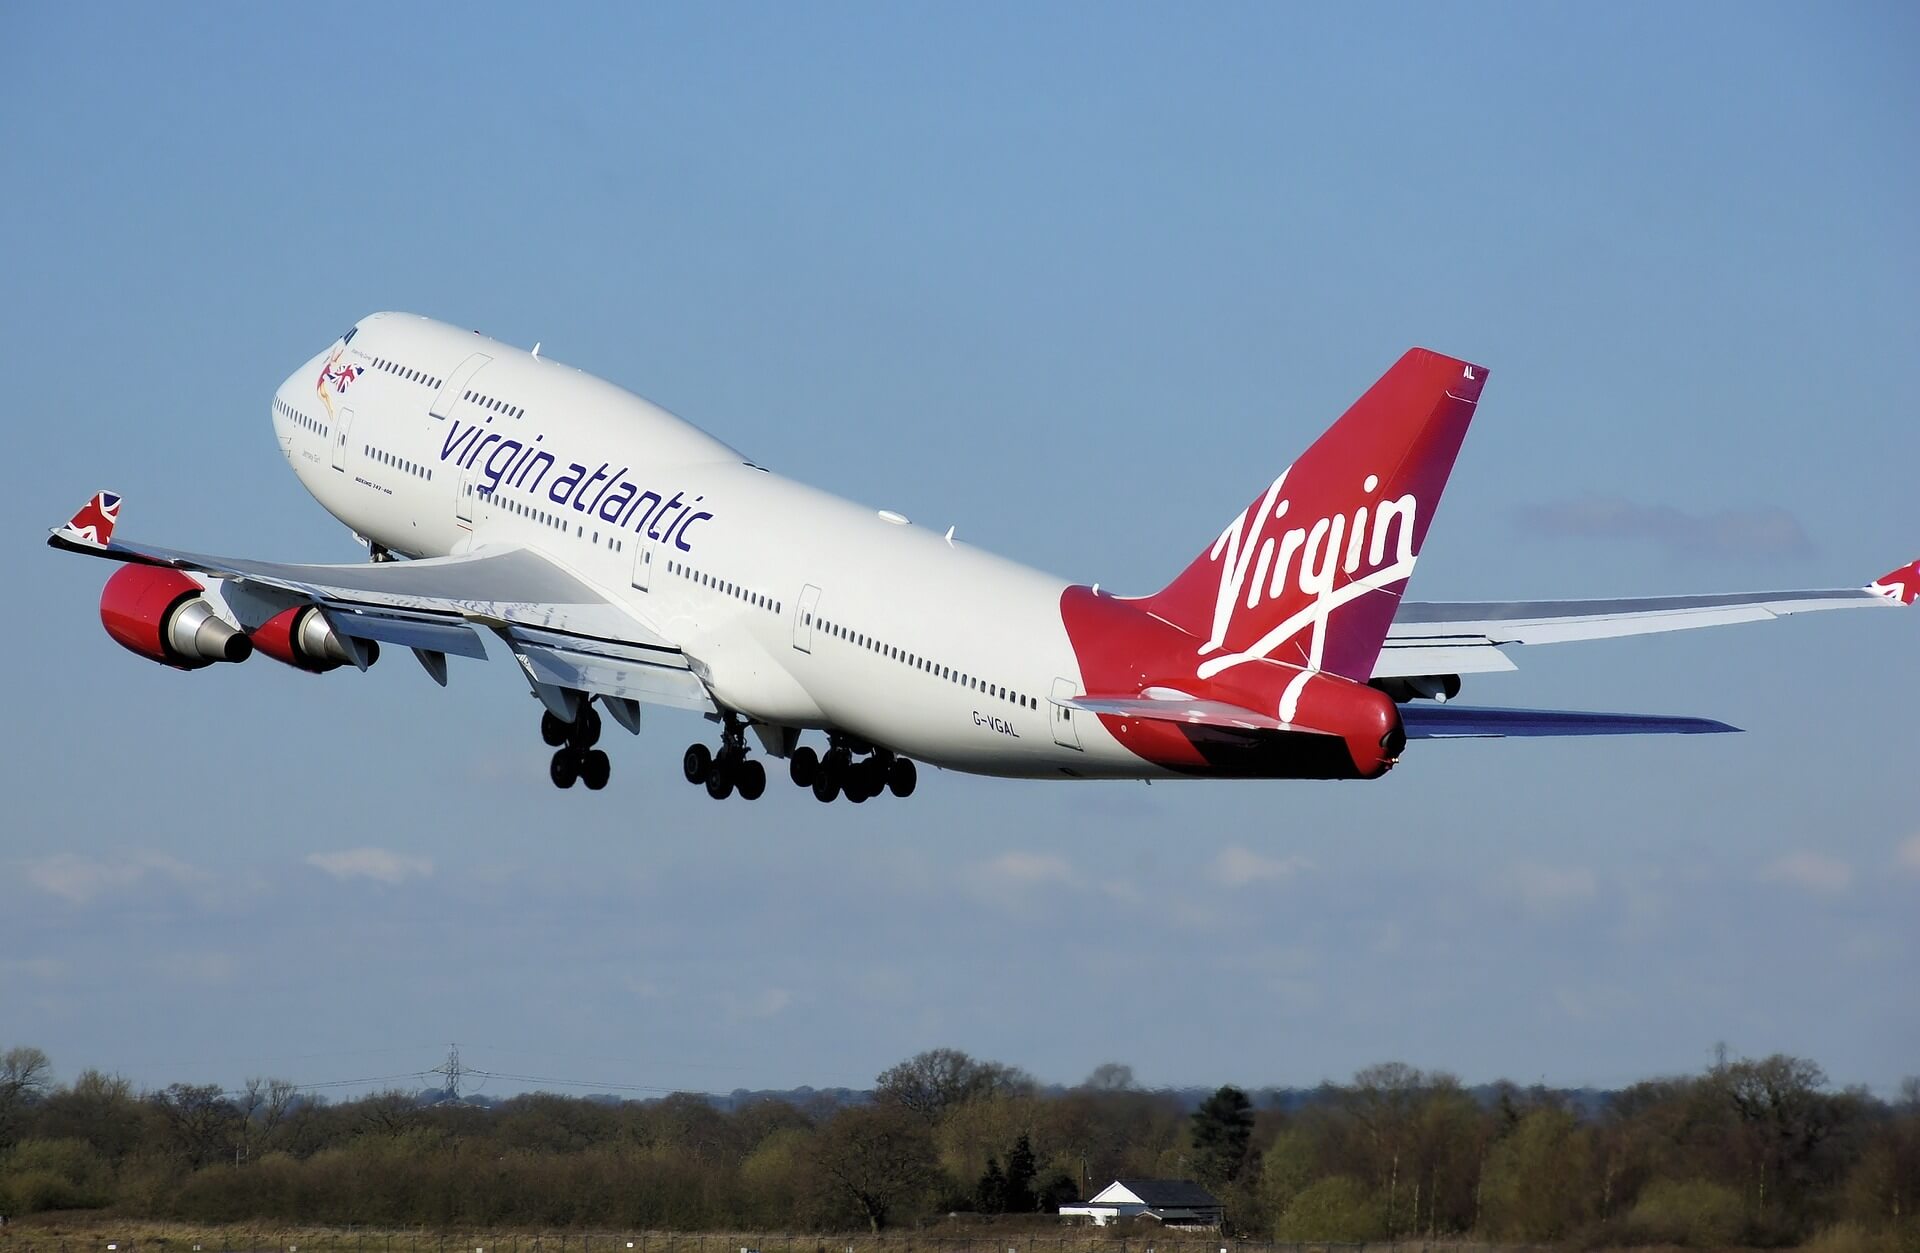 Richard Branson made a gutsy decision to launch the Virgin Atlantic airline